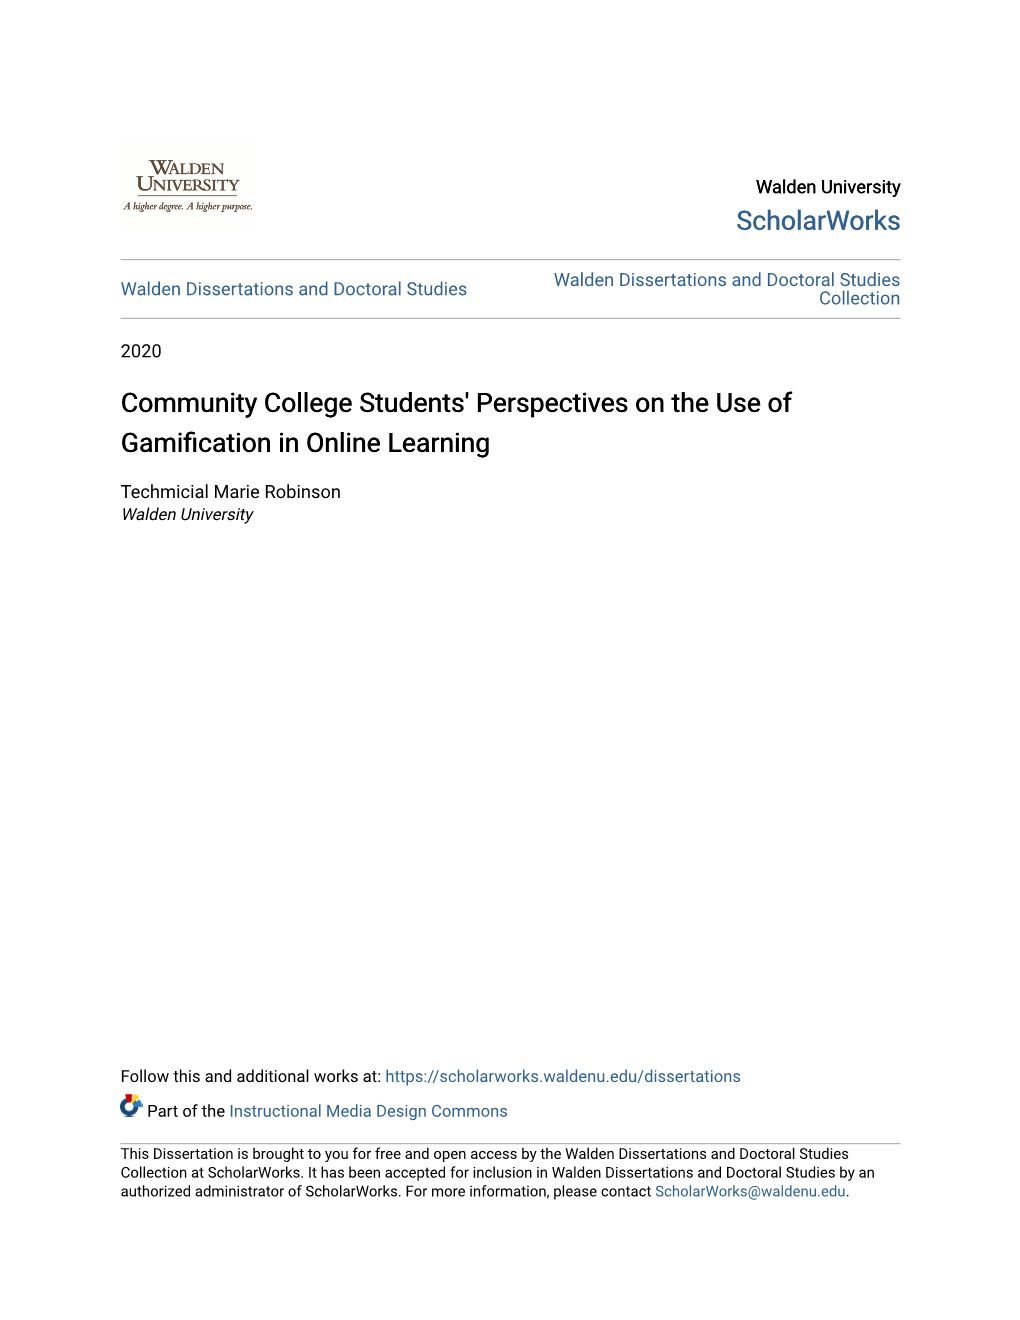 Community College Students' Perspectives on the Use of Gamification in Online Learning